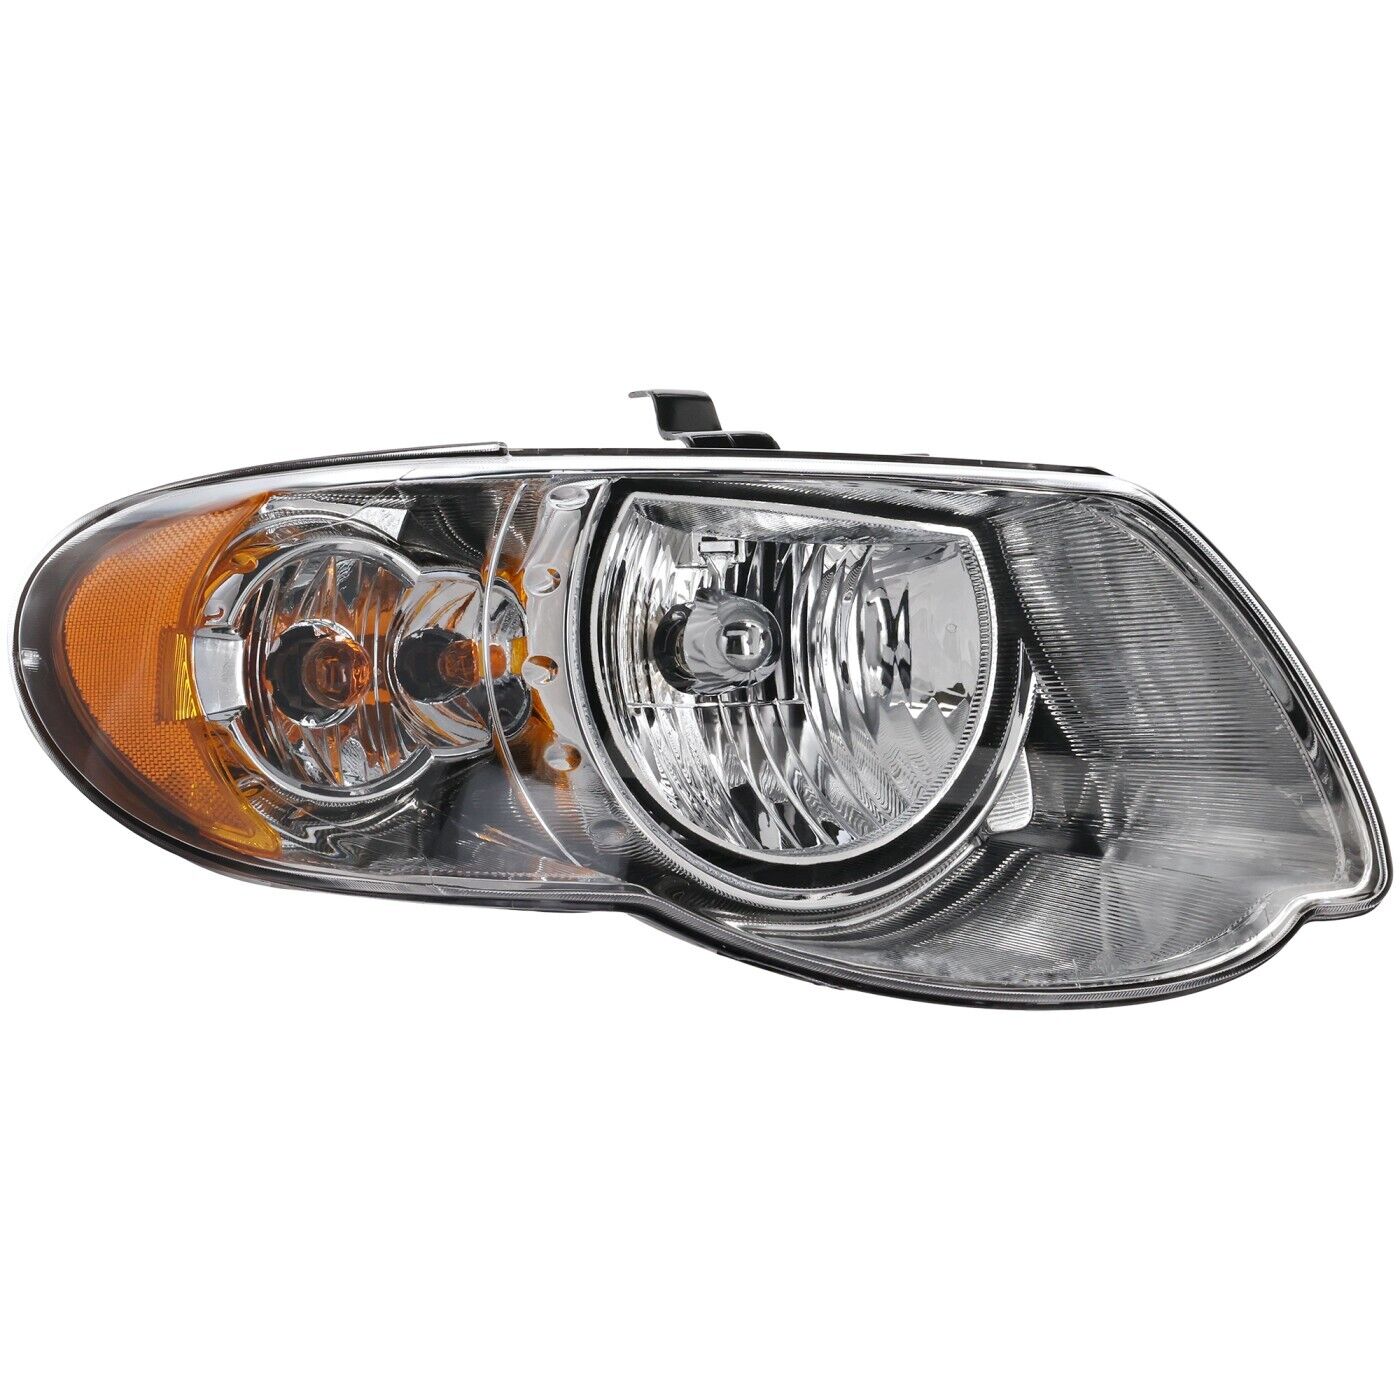 Headlight Right For 2005-2007 Chrysler Town & Country Long Wheelbase 119 inch WB